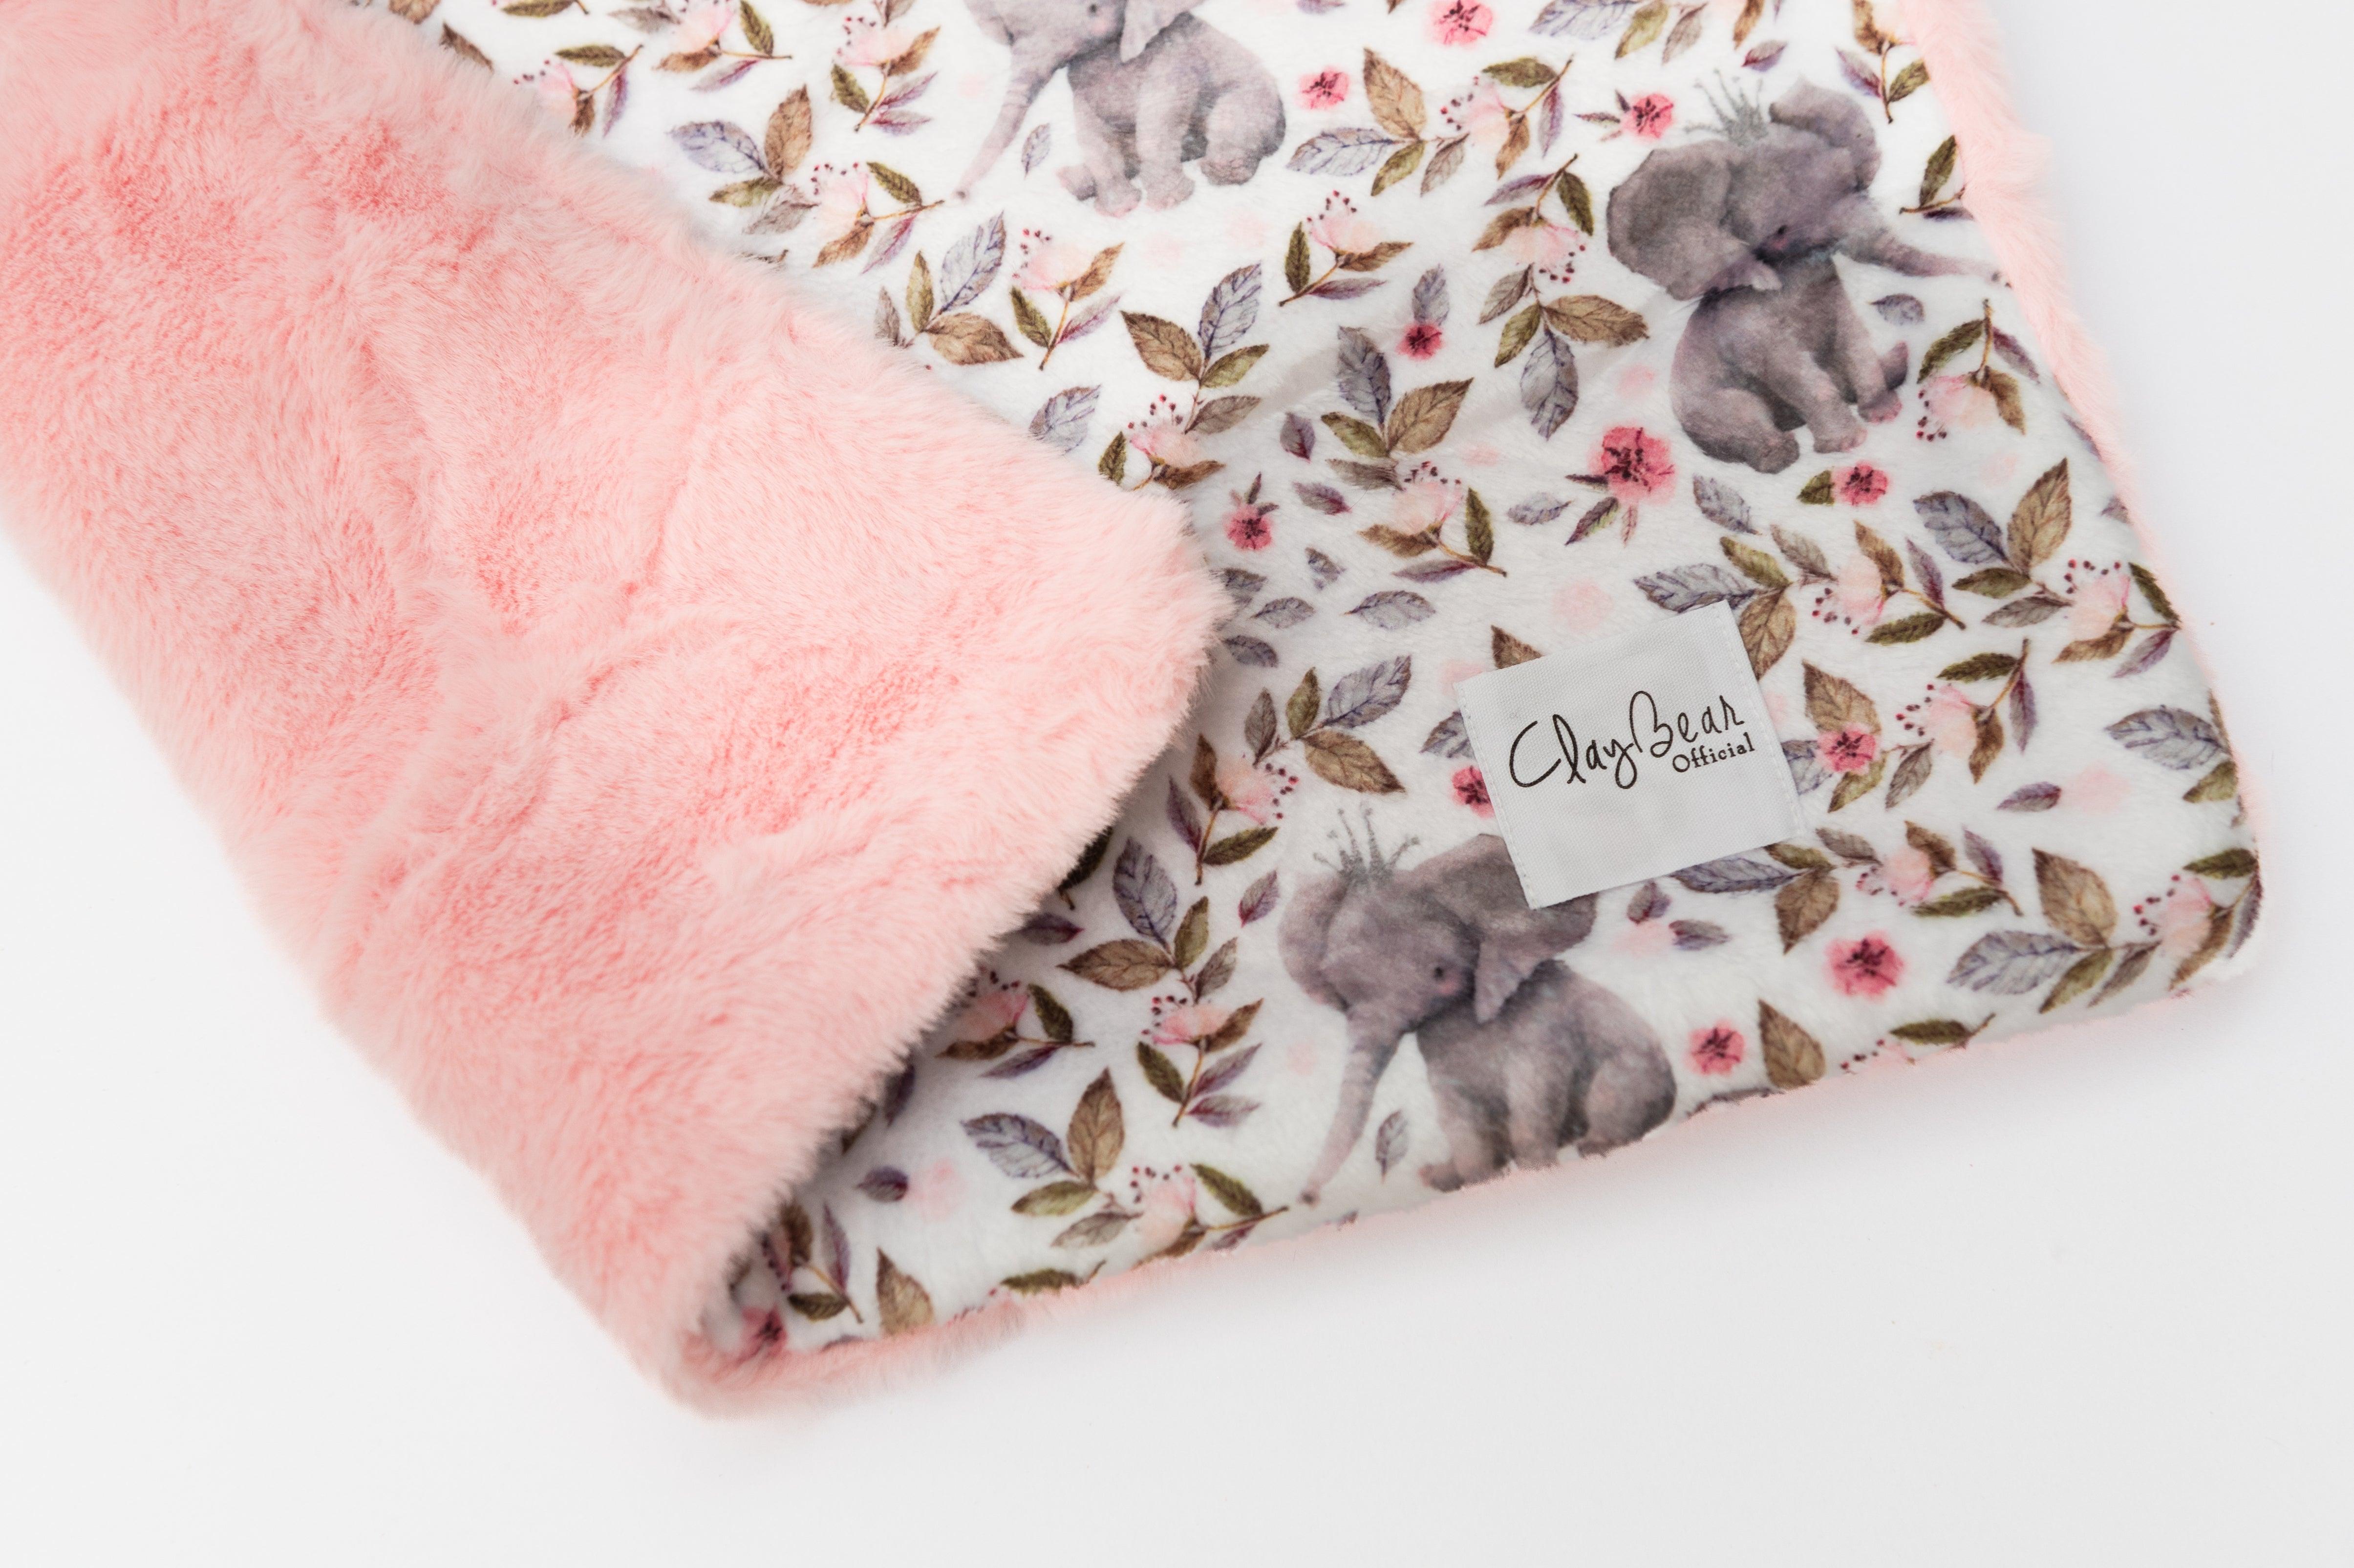 files/floral-elephant-comforter-claybearofficial-2.jpg